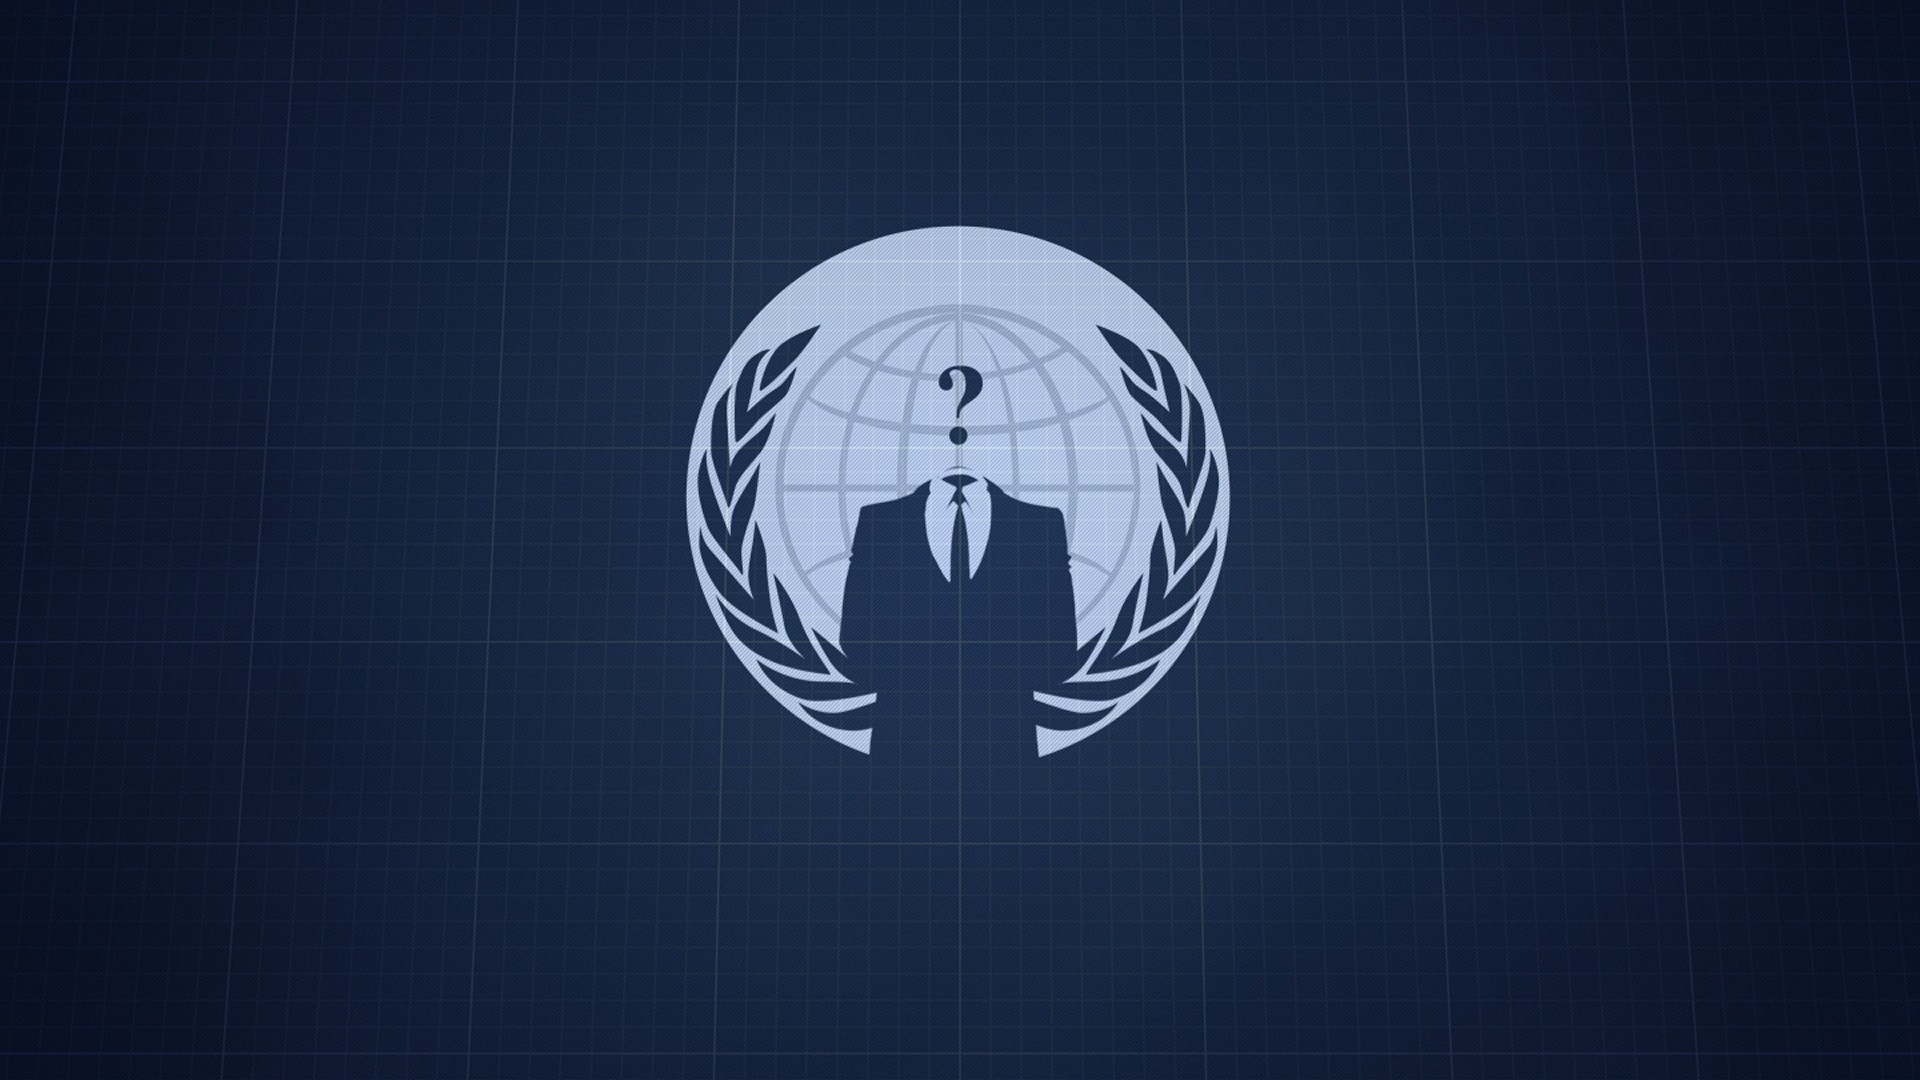 General 1920x1080 minimalism Anonymous (hacker group) technology grid lines